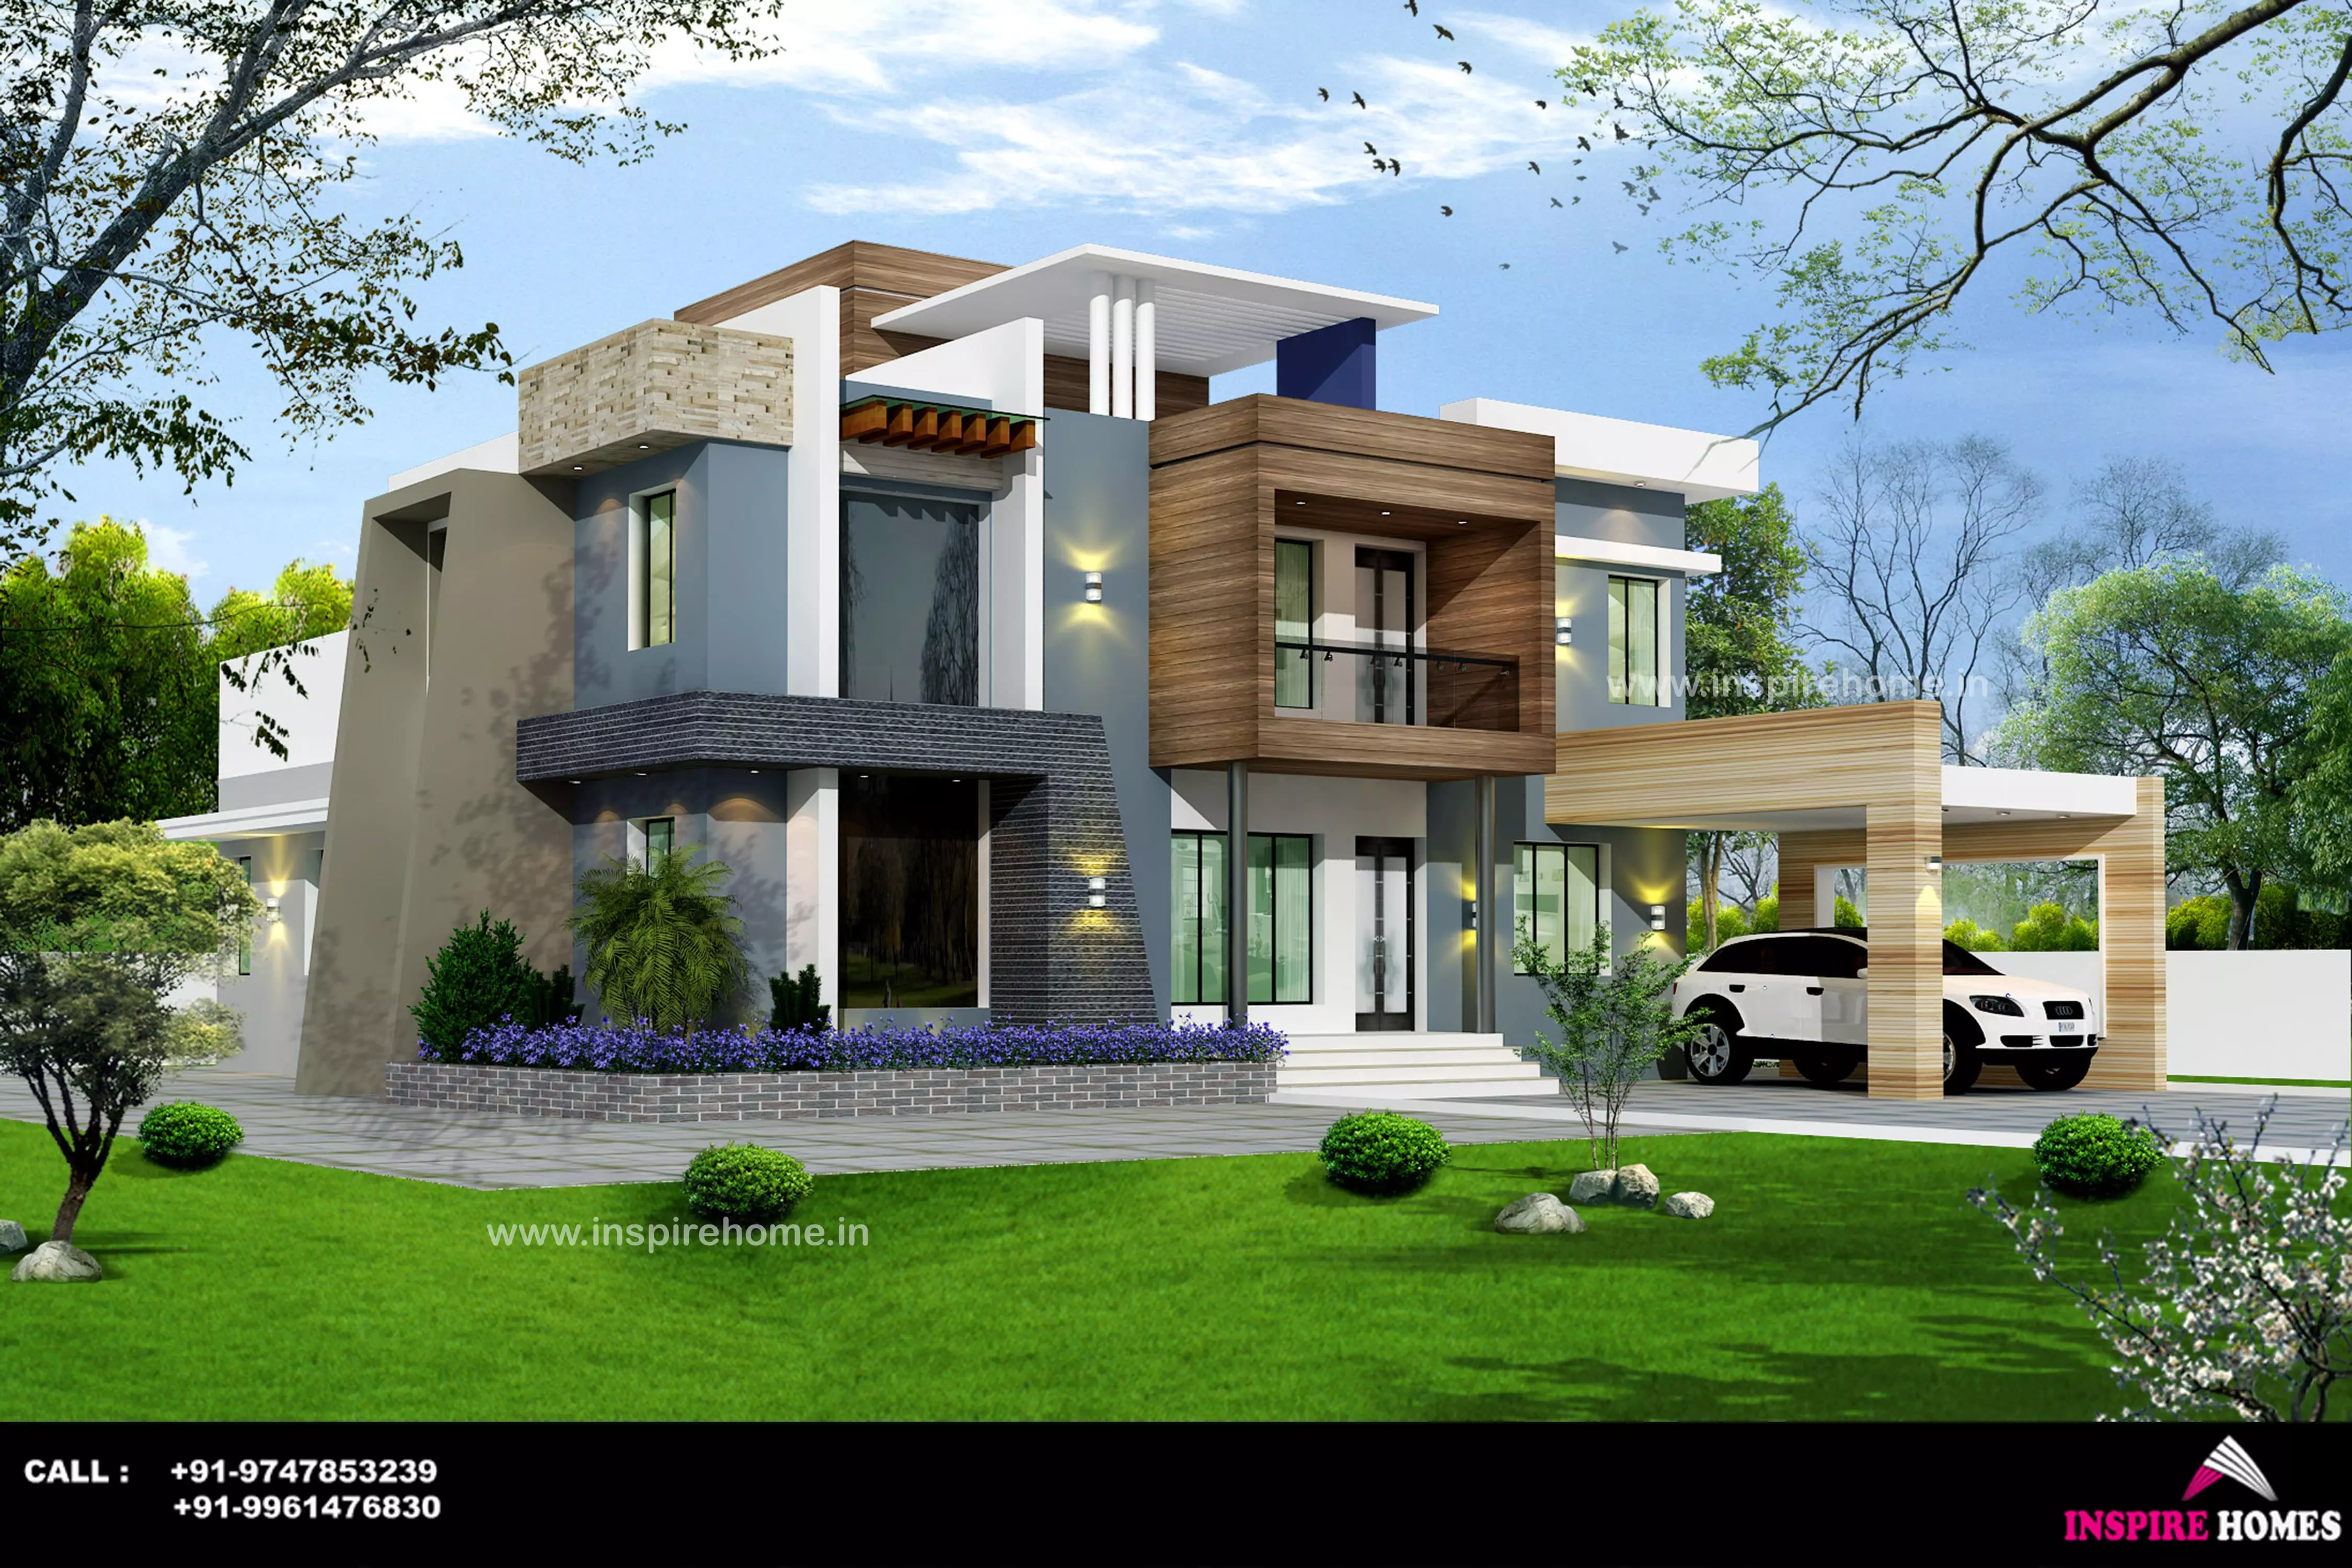 inspire homes construction packages